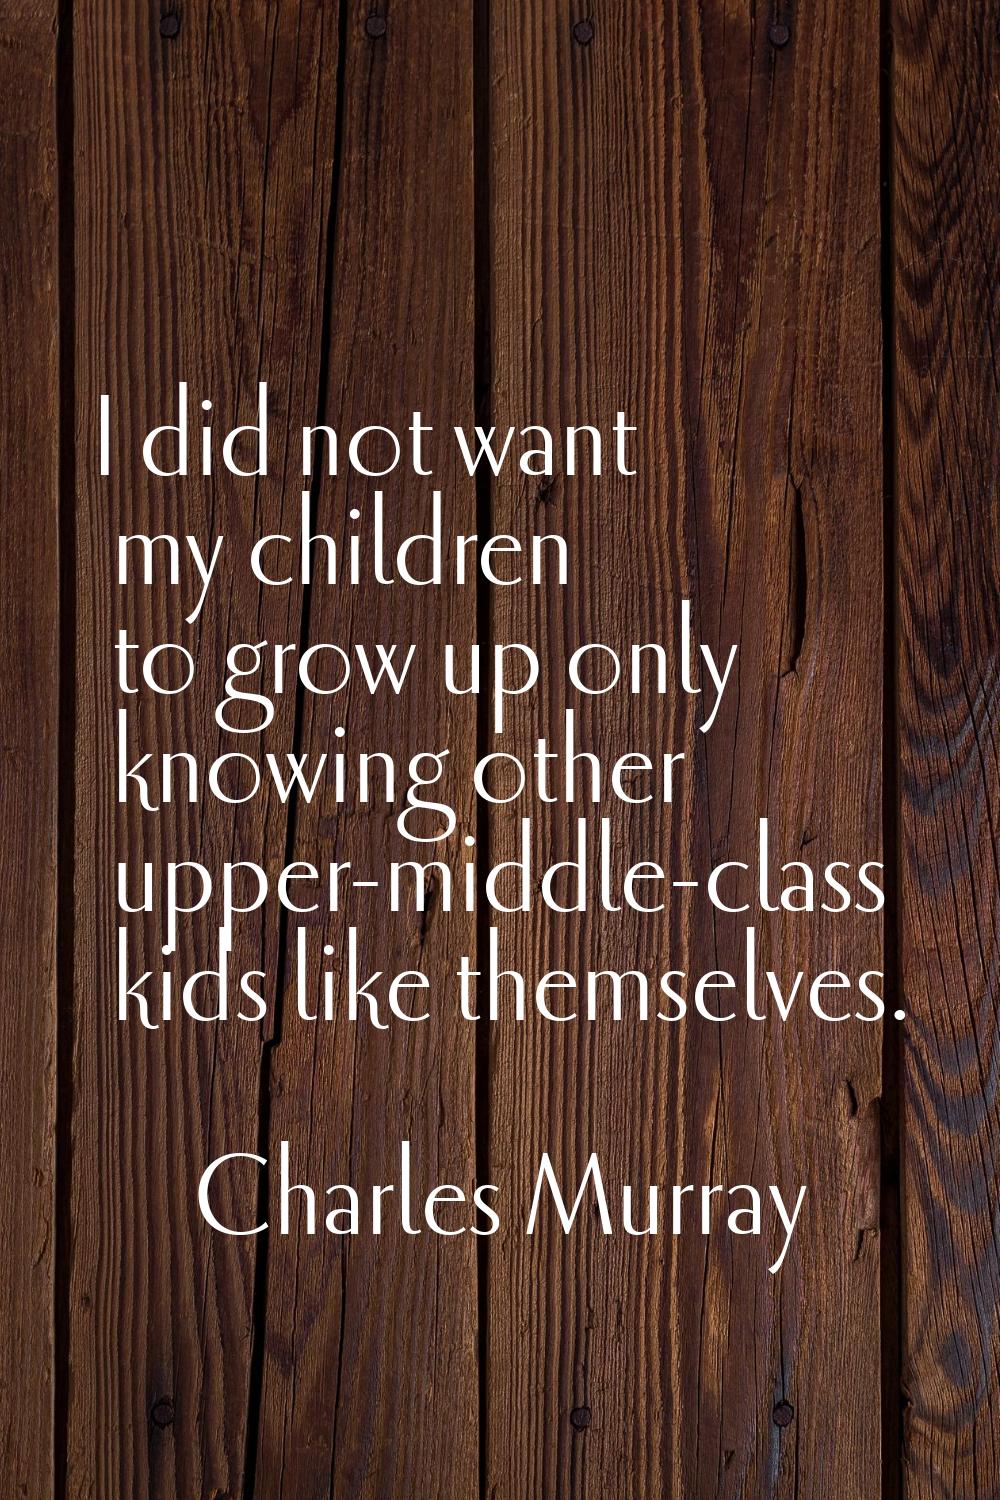 I did not want my children to grow up only knowing other upper-middle-class kids like themselves.